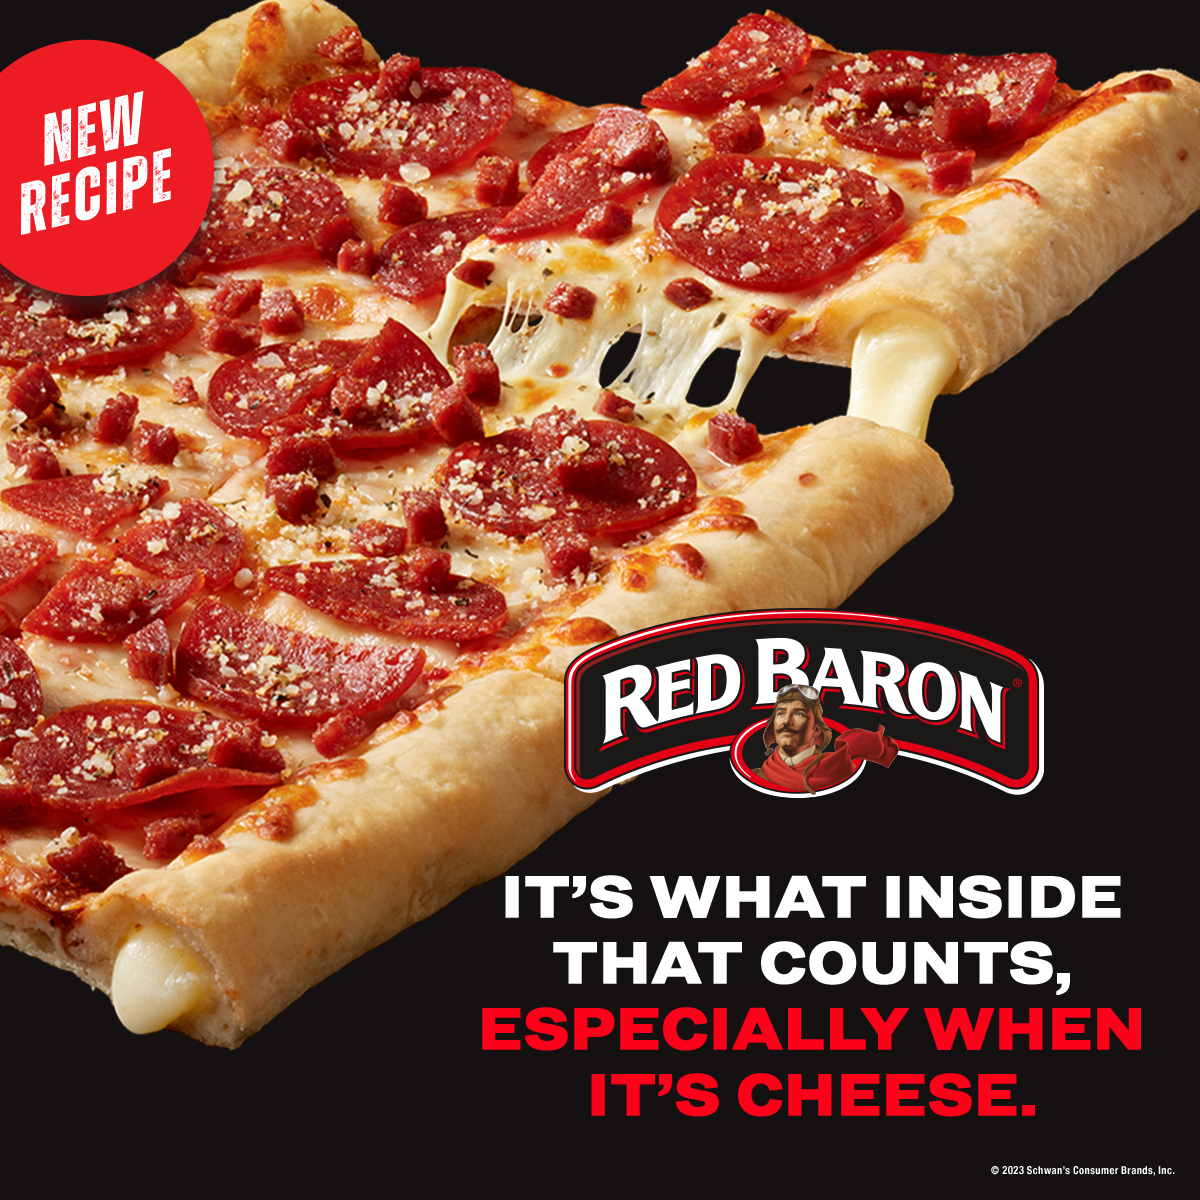 Red Baron® New Recipe. It's what inside that counts, especially when it's cheese.